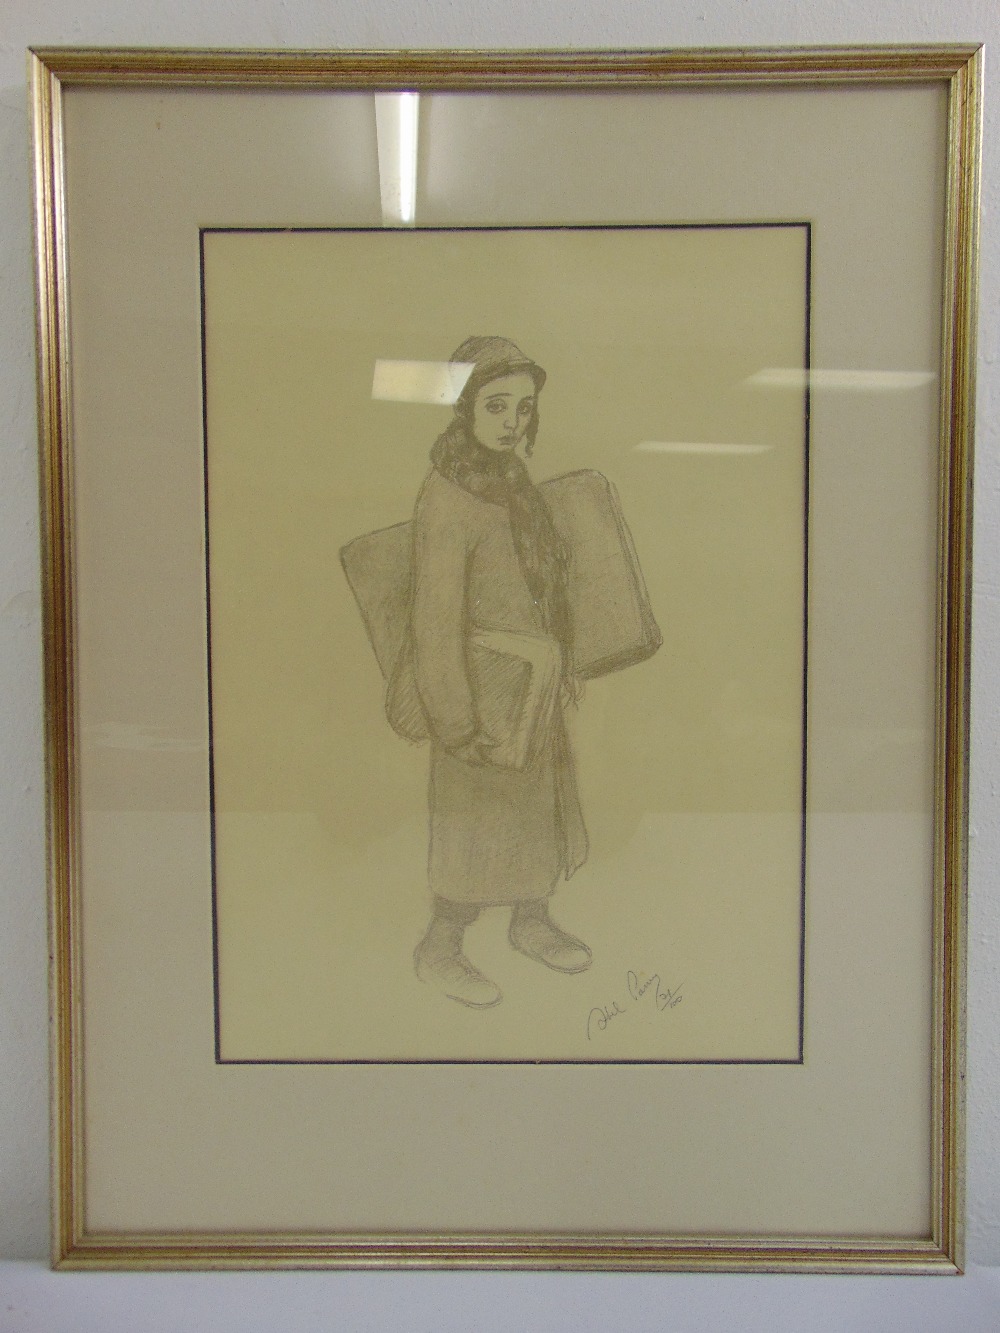 Abel Pfeffermann Pann framed and glazed signed limited edition lithograph of a boy in orthodox